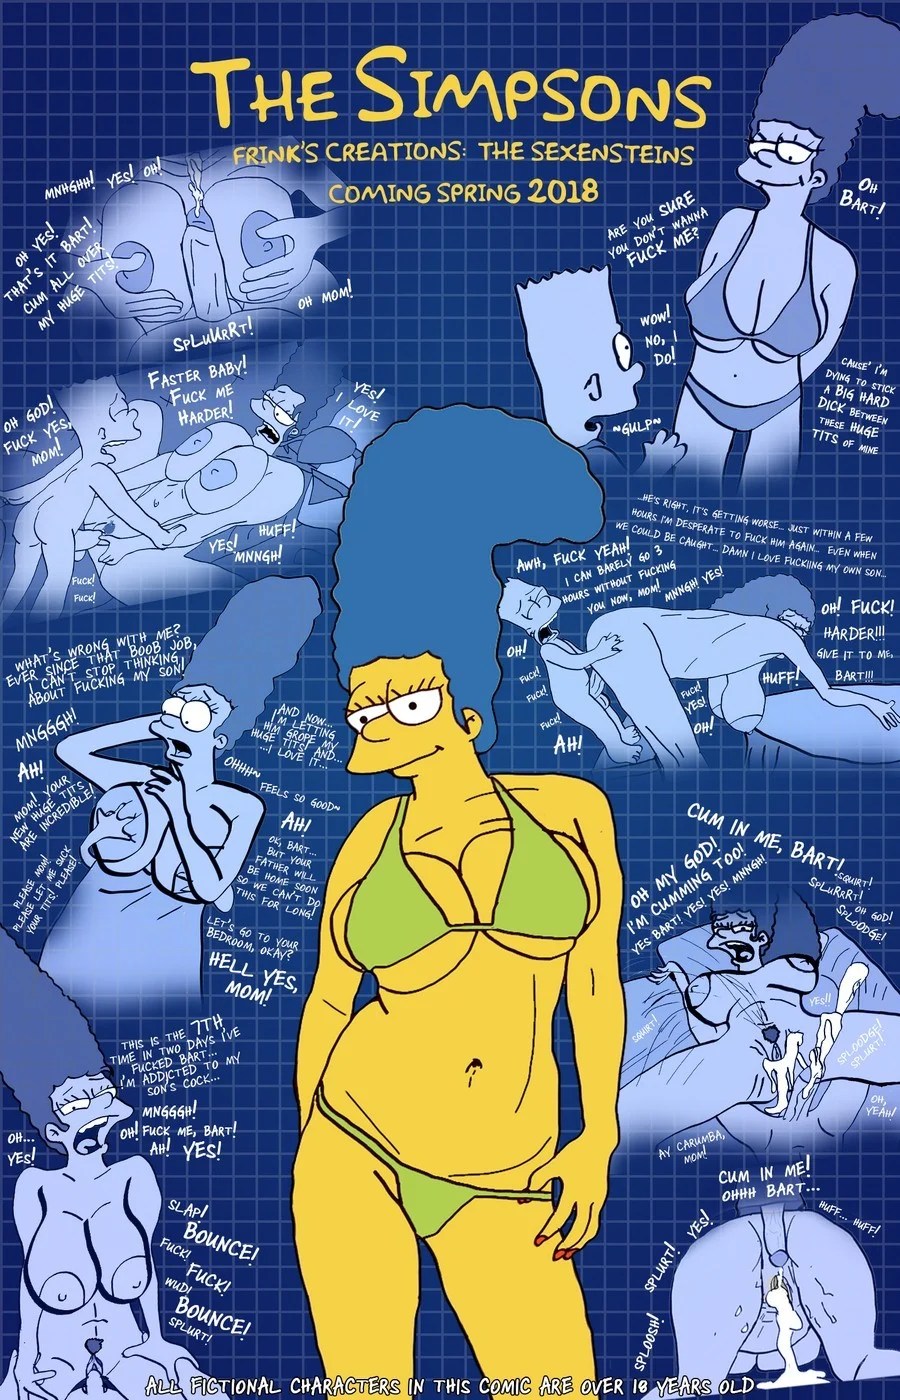 The Simpsons are The Sexenteins - 797c8070705ed48d965551912ae40bcb